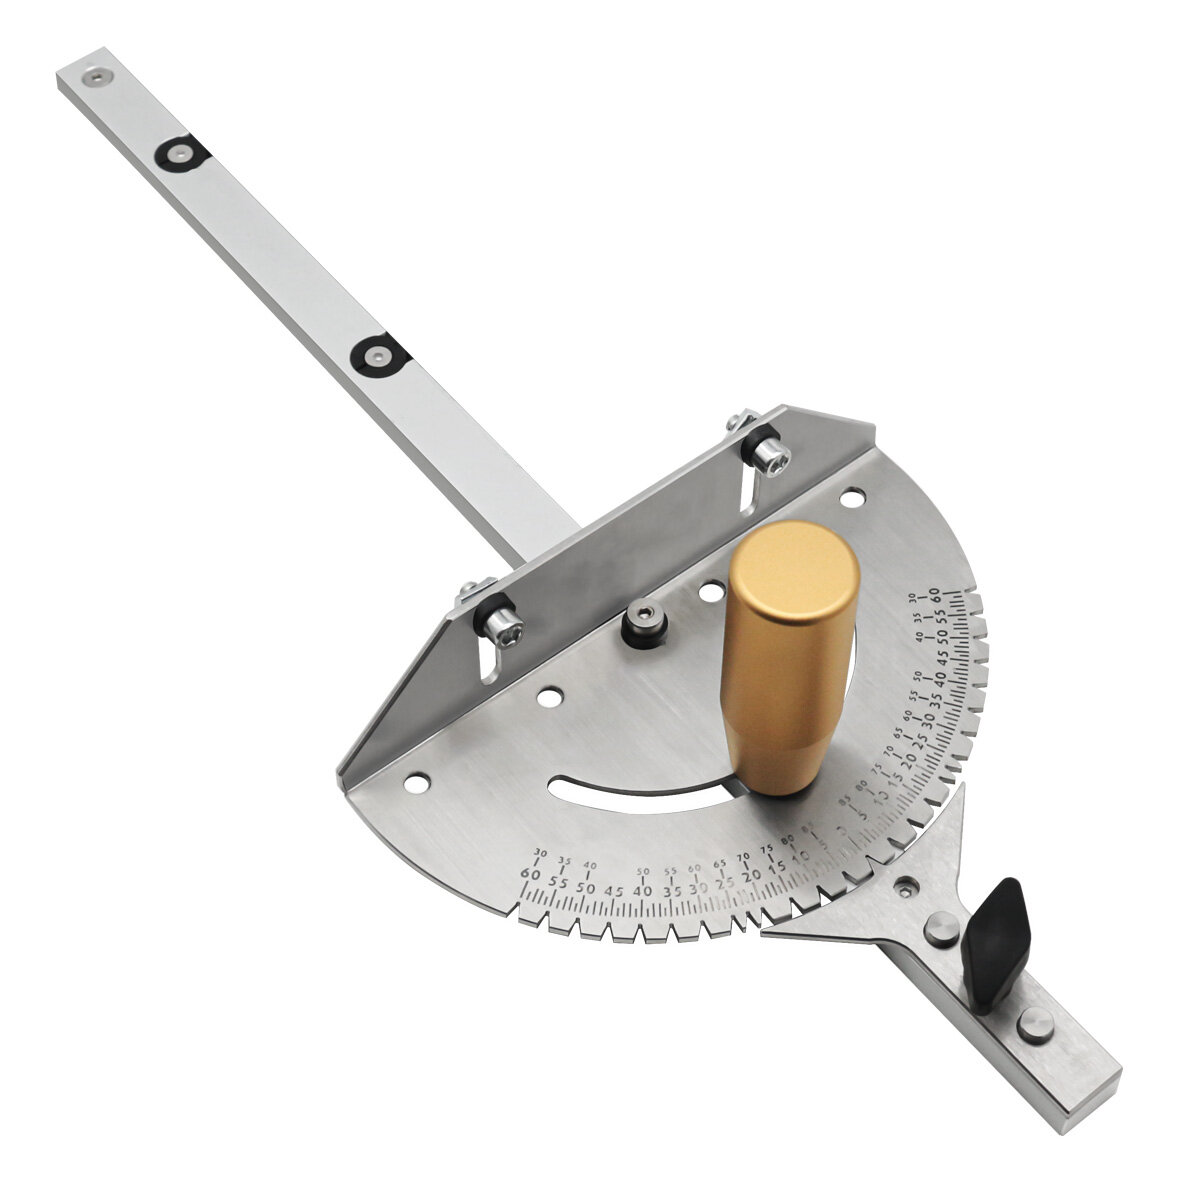 Precision Miter Gauge W/ A Standard Slot -Universal Table Saw Miter Gauge High Accuracy Miter Saw Protractor with 27 Ang